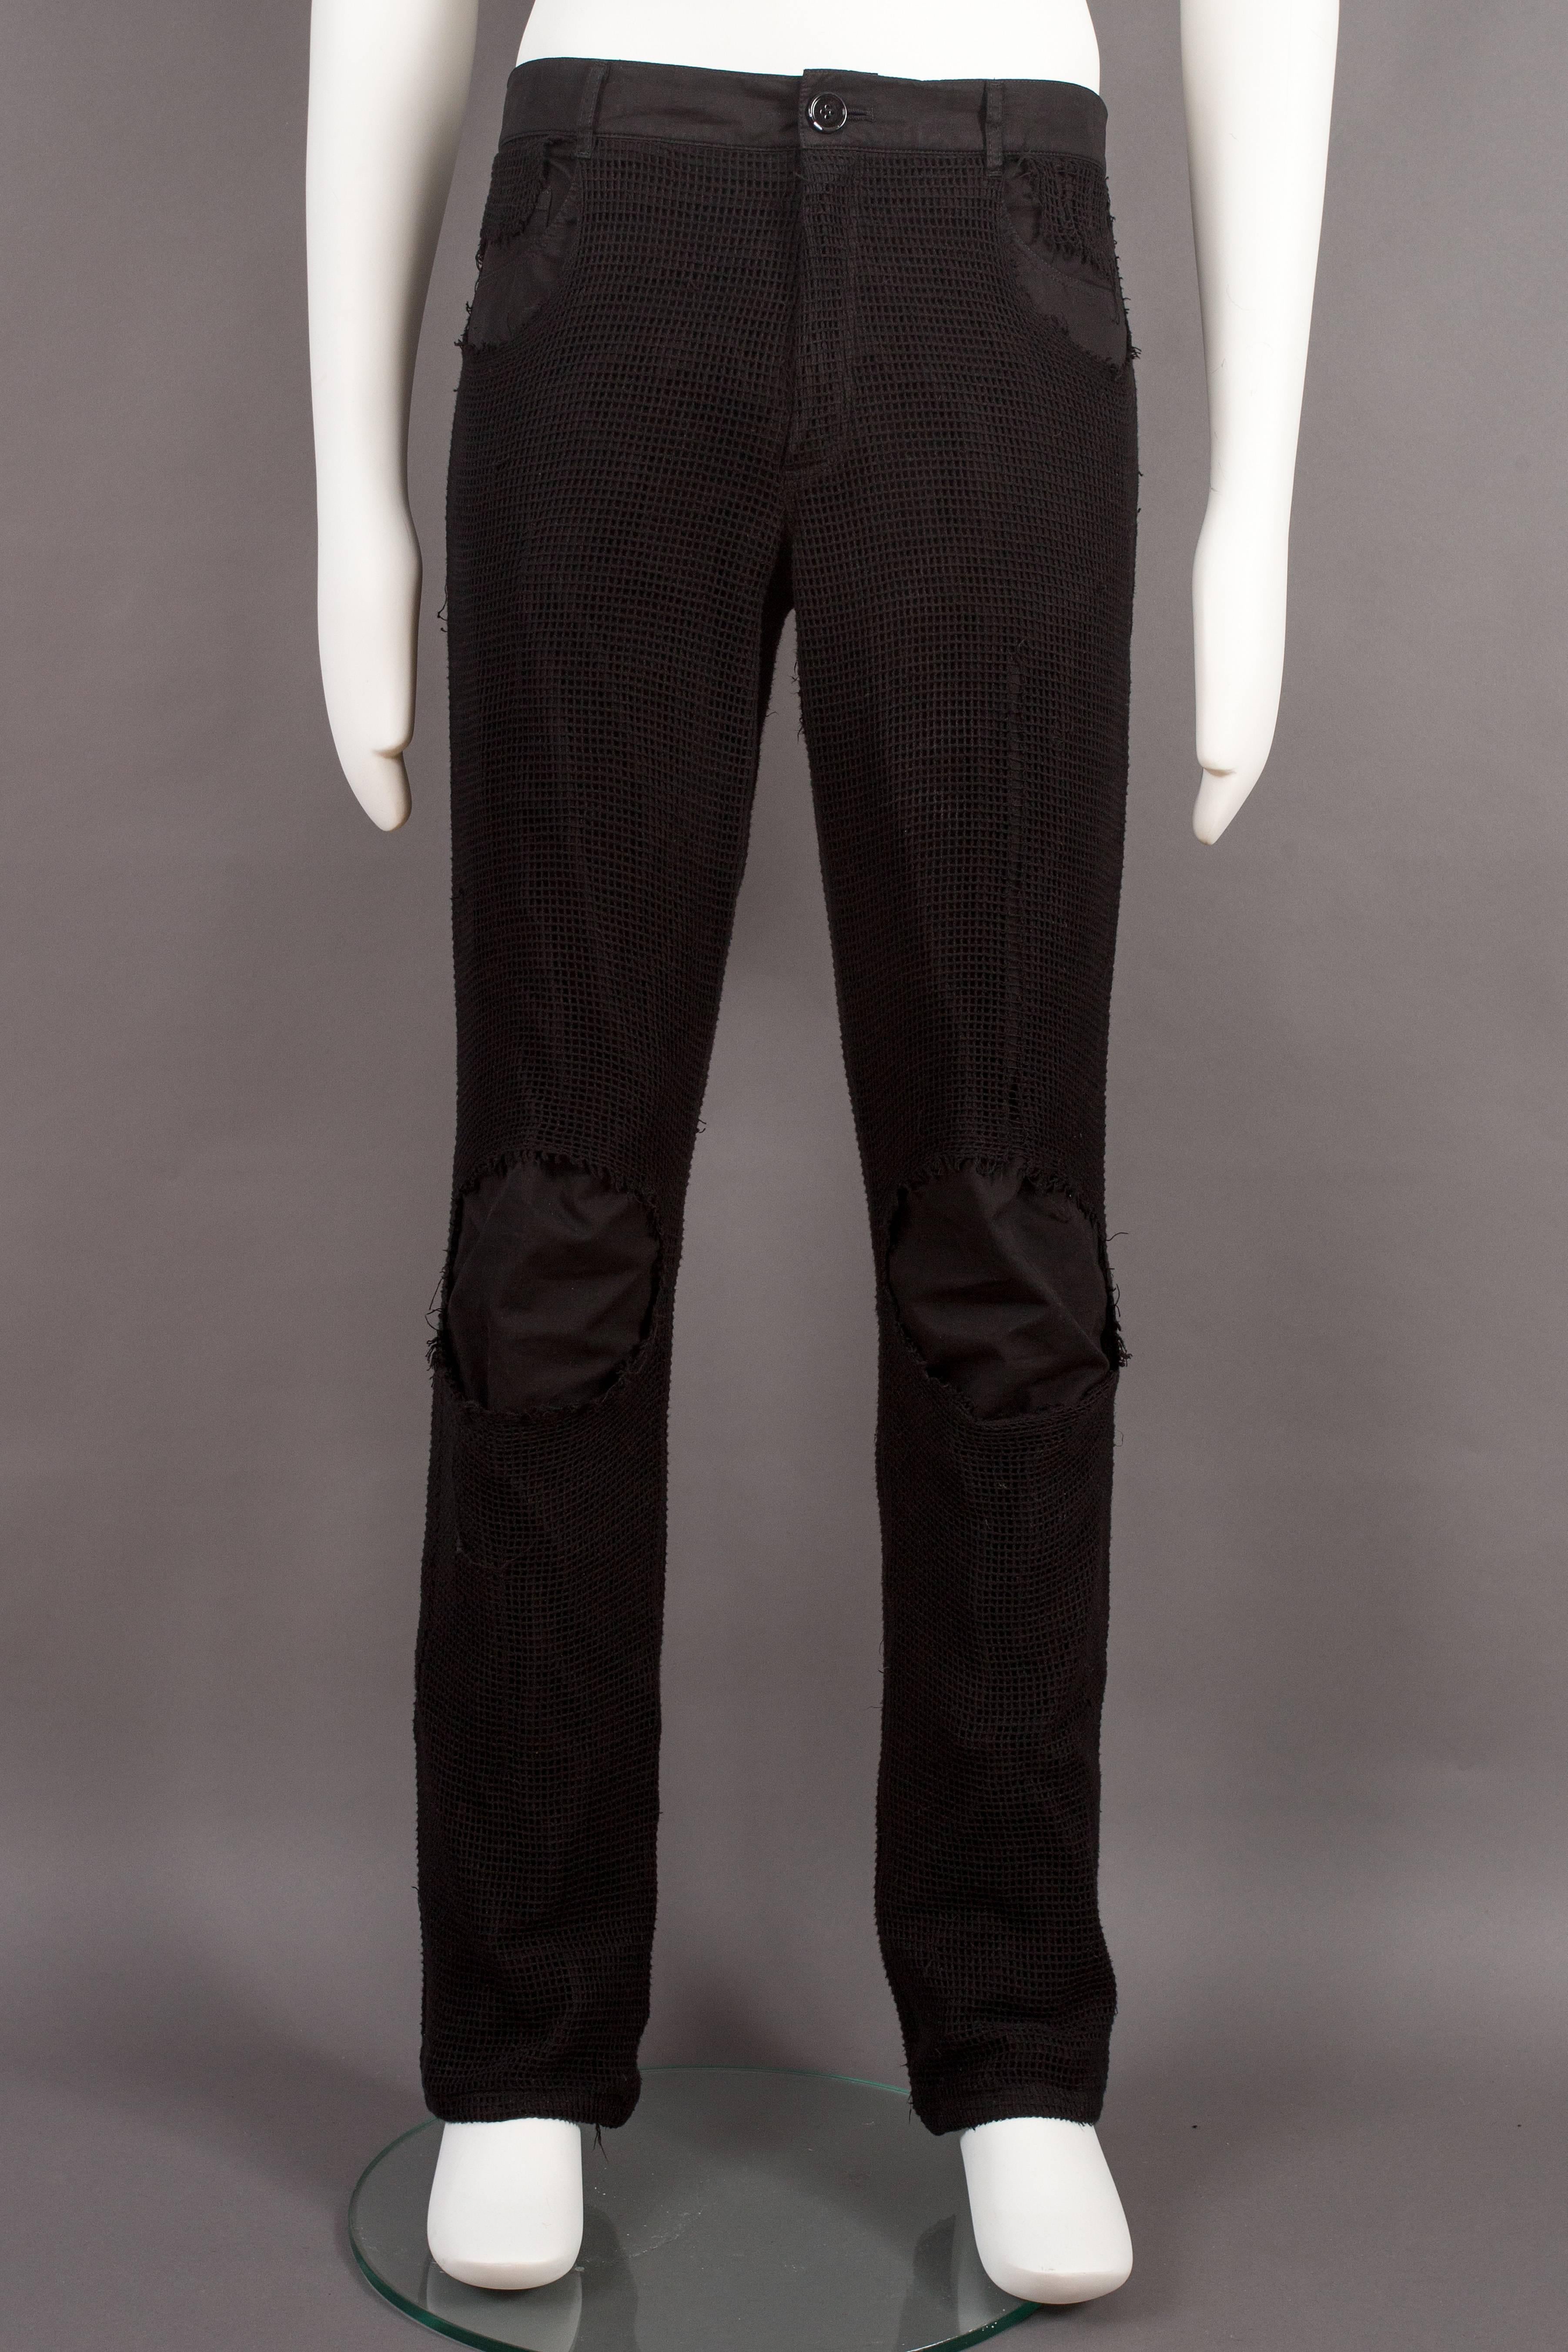 Raf Simons black jean pants with distressed net overlay, 'consumed' spring summer 2003. 

